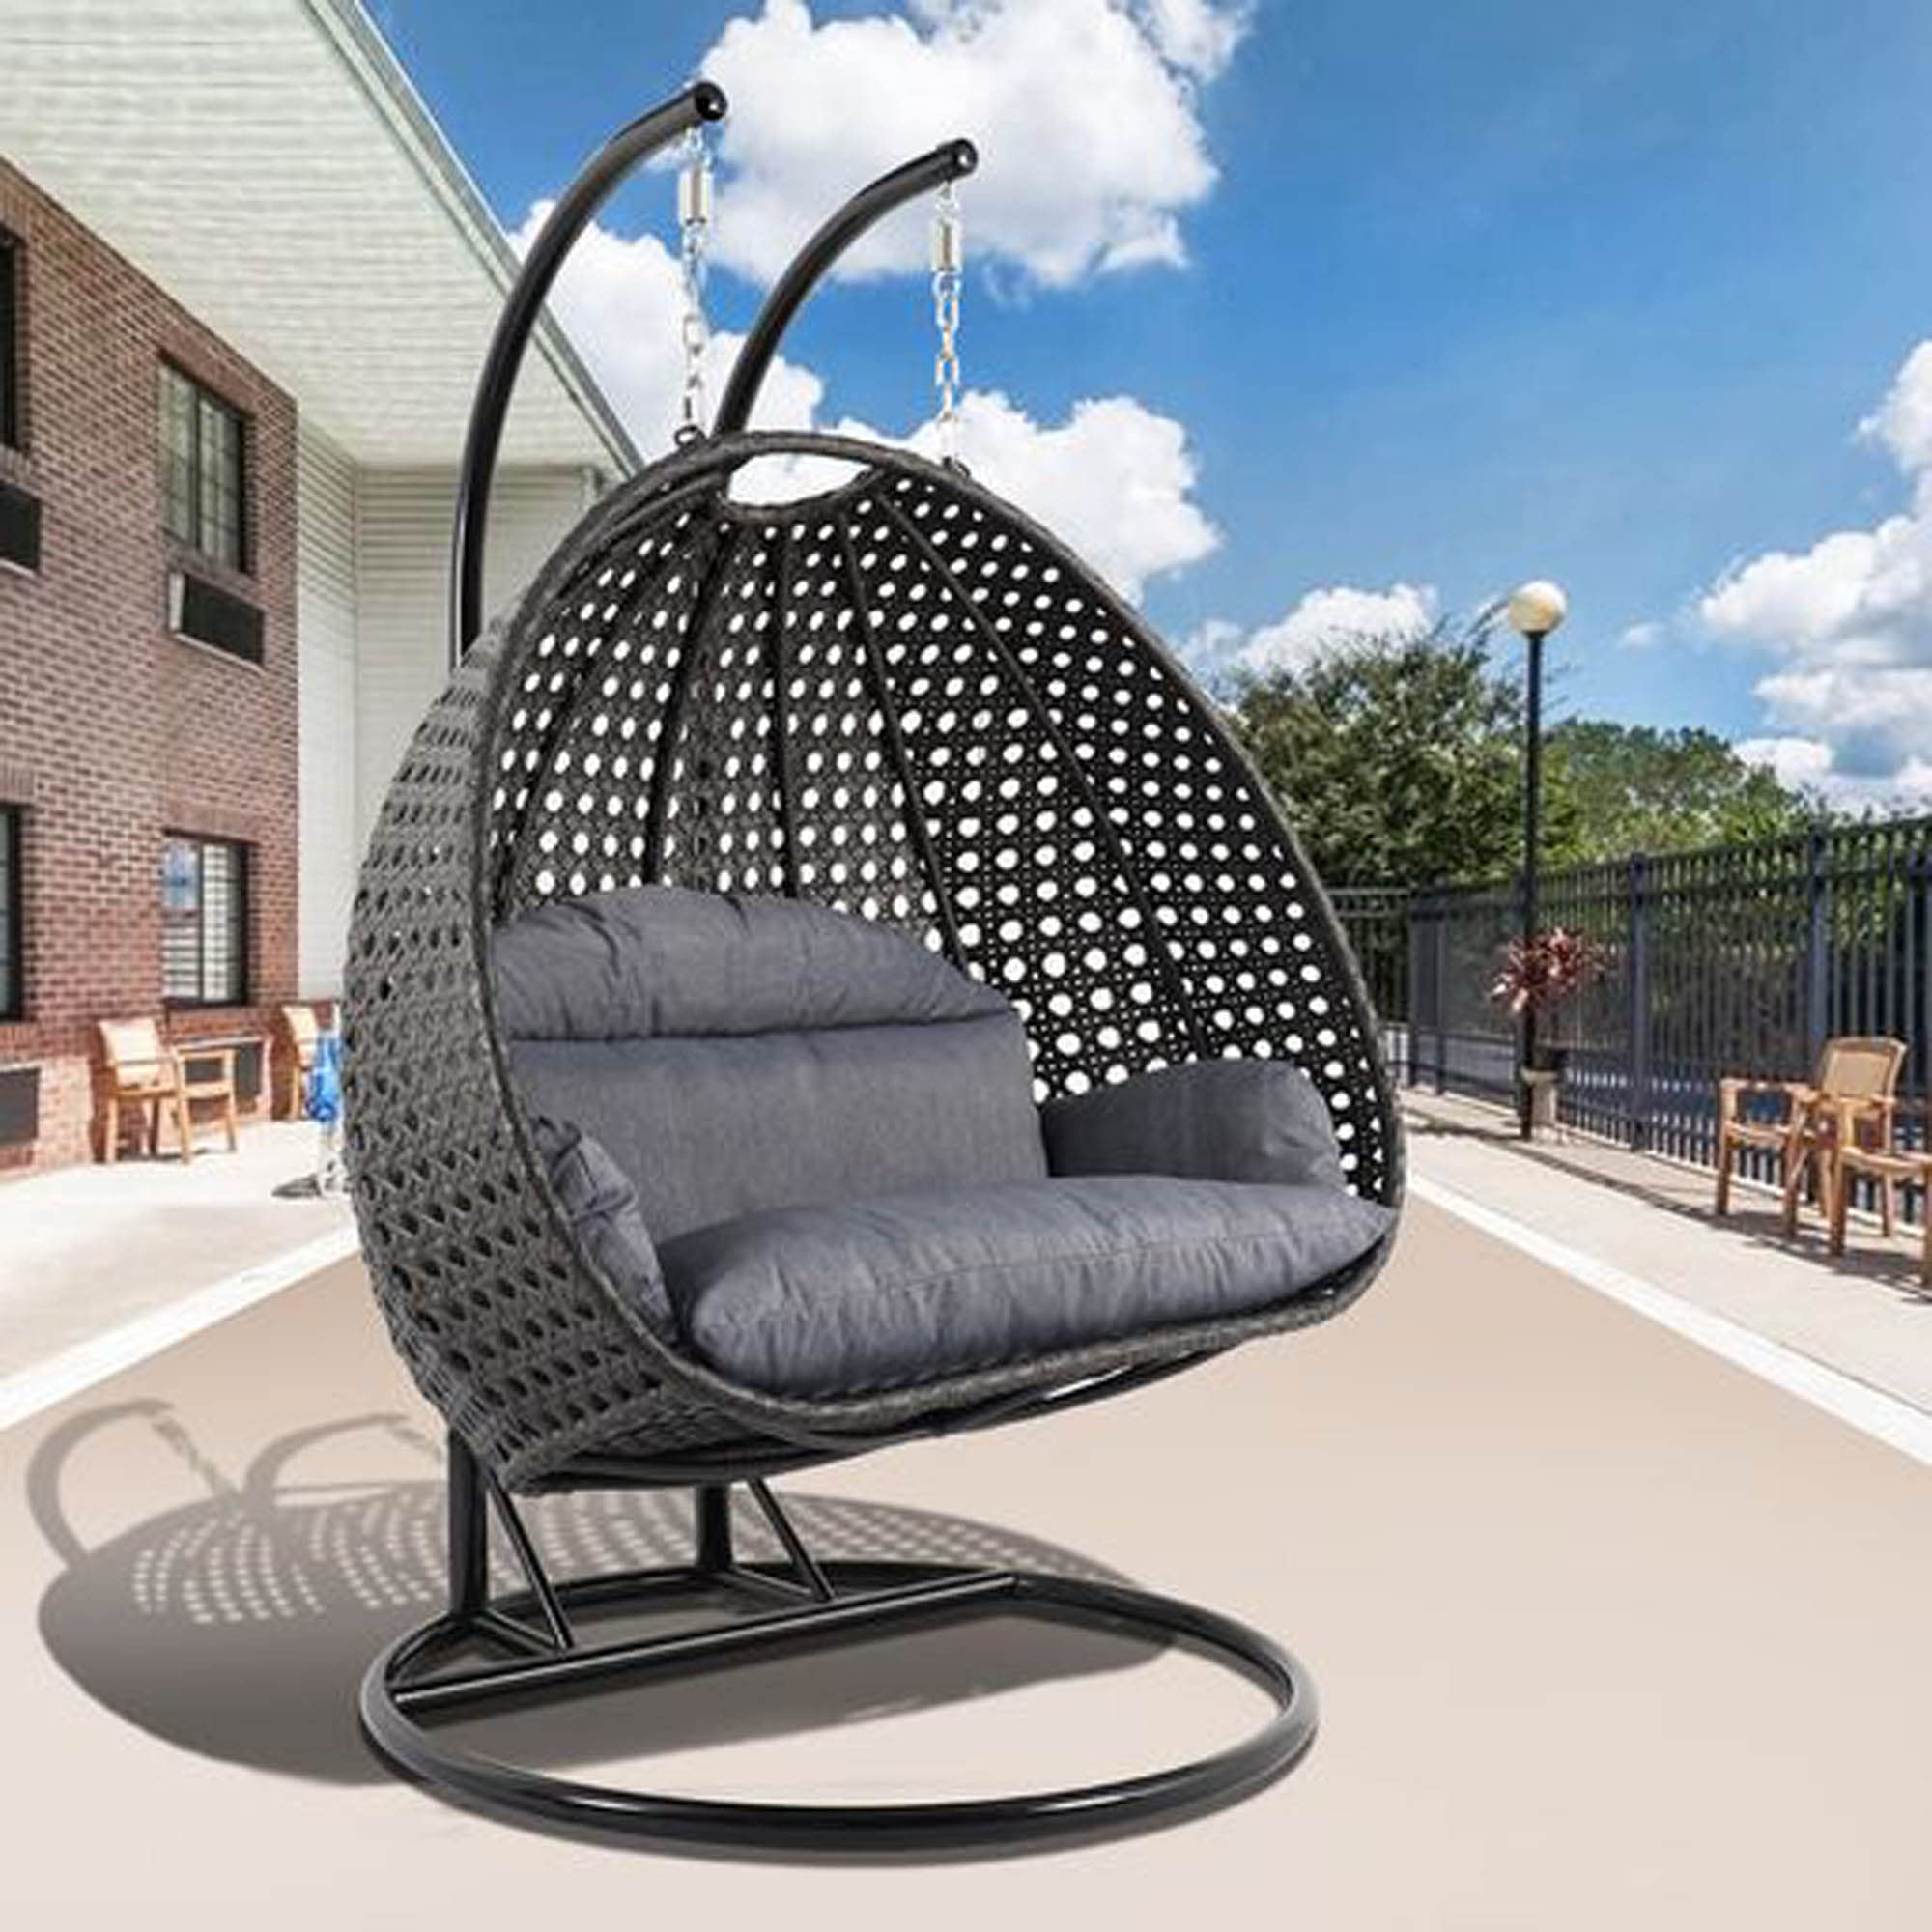  2-person wicker egg chair with black stand and UV-resistant cushion (beige)